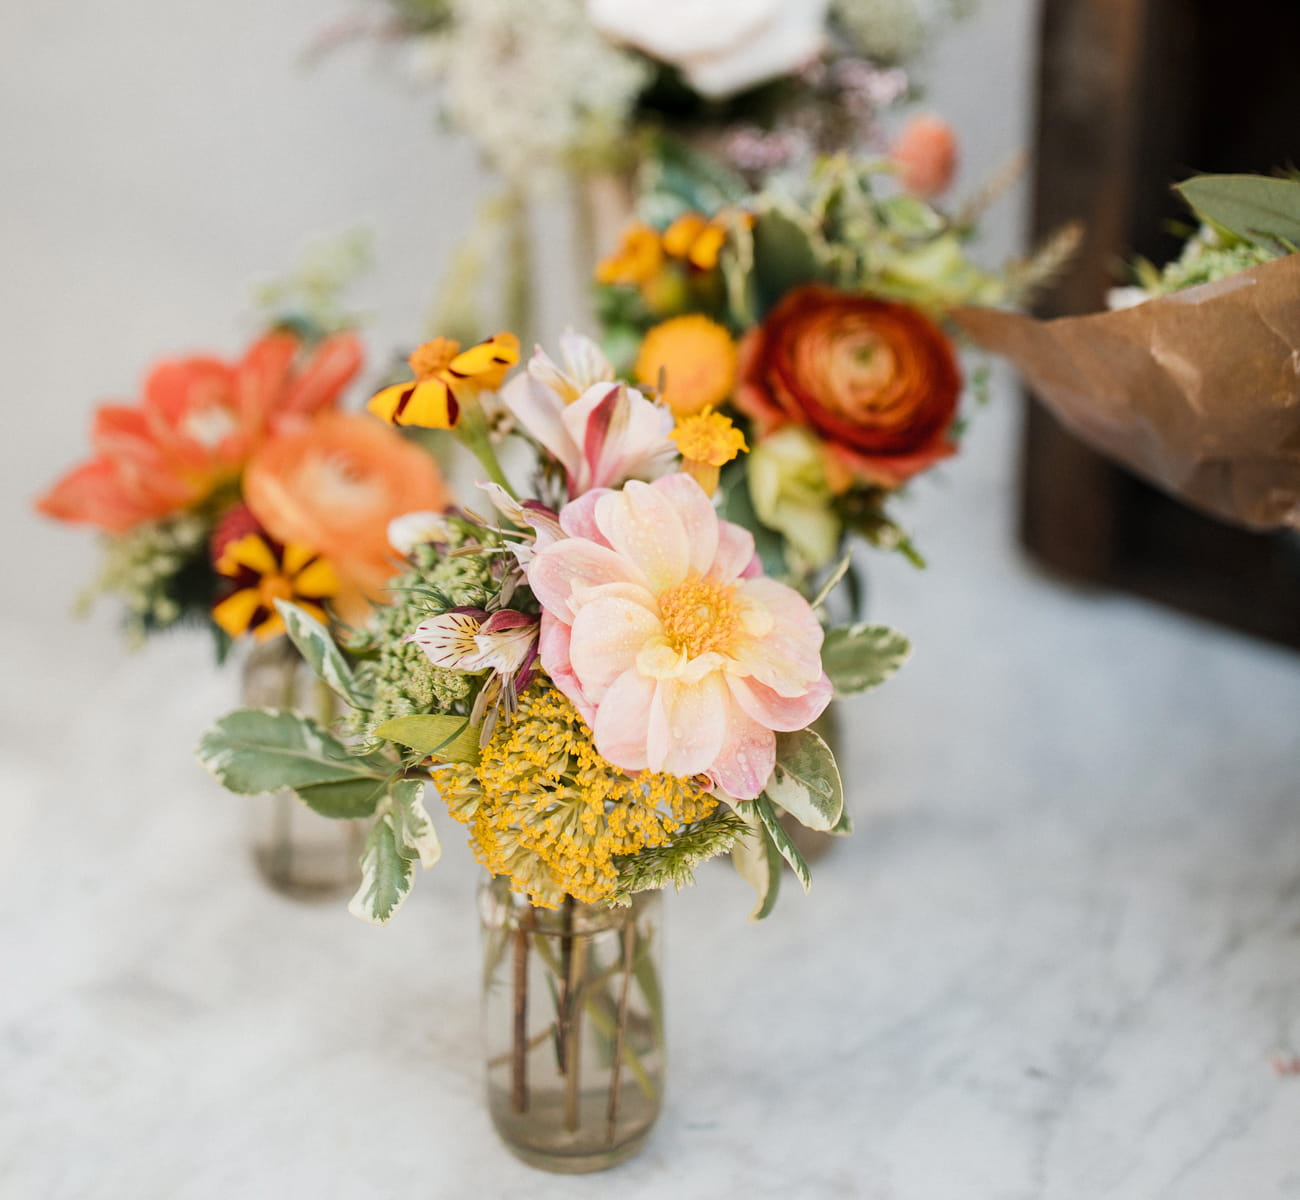 Several small glass vases on the white countertop hold cute little DIY flower bouquets.